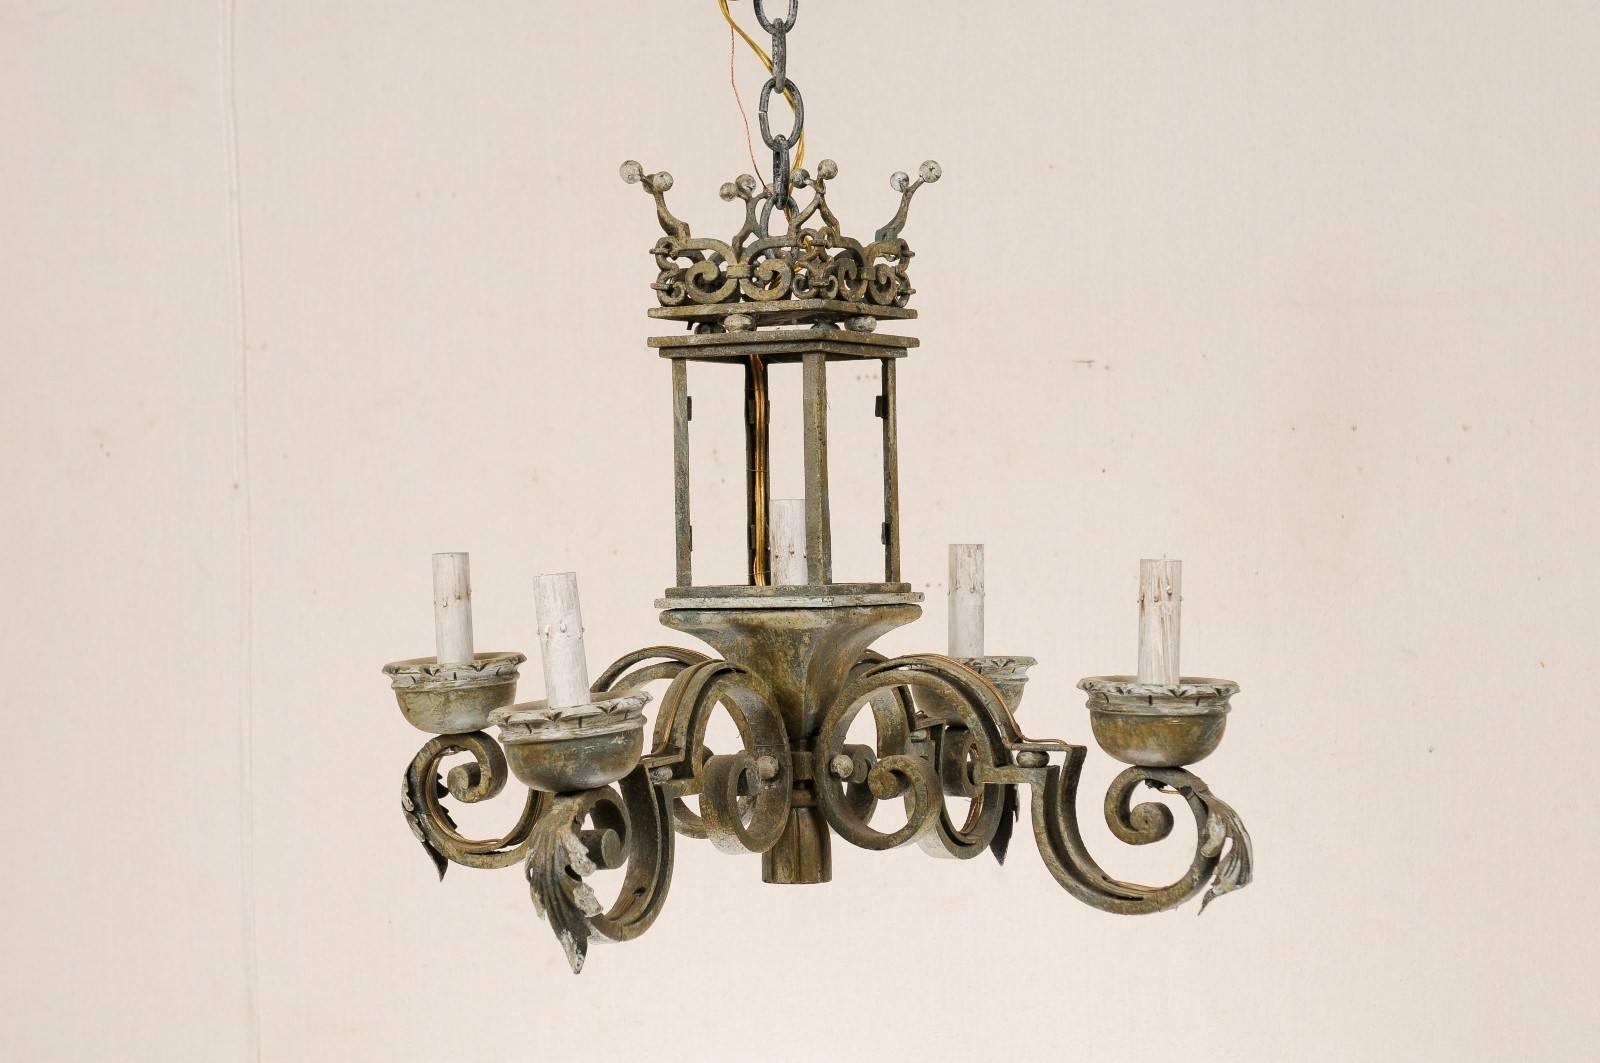 An Italian five-light chandelier. This hand-forged Italian chandelier from the mid-20th century has a unique lantern style central body. Scrolled arms emerge from the base of the central rectangular shape presenting lights from all four sides with